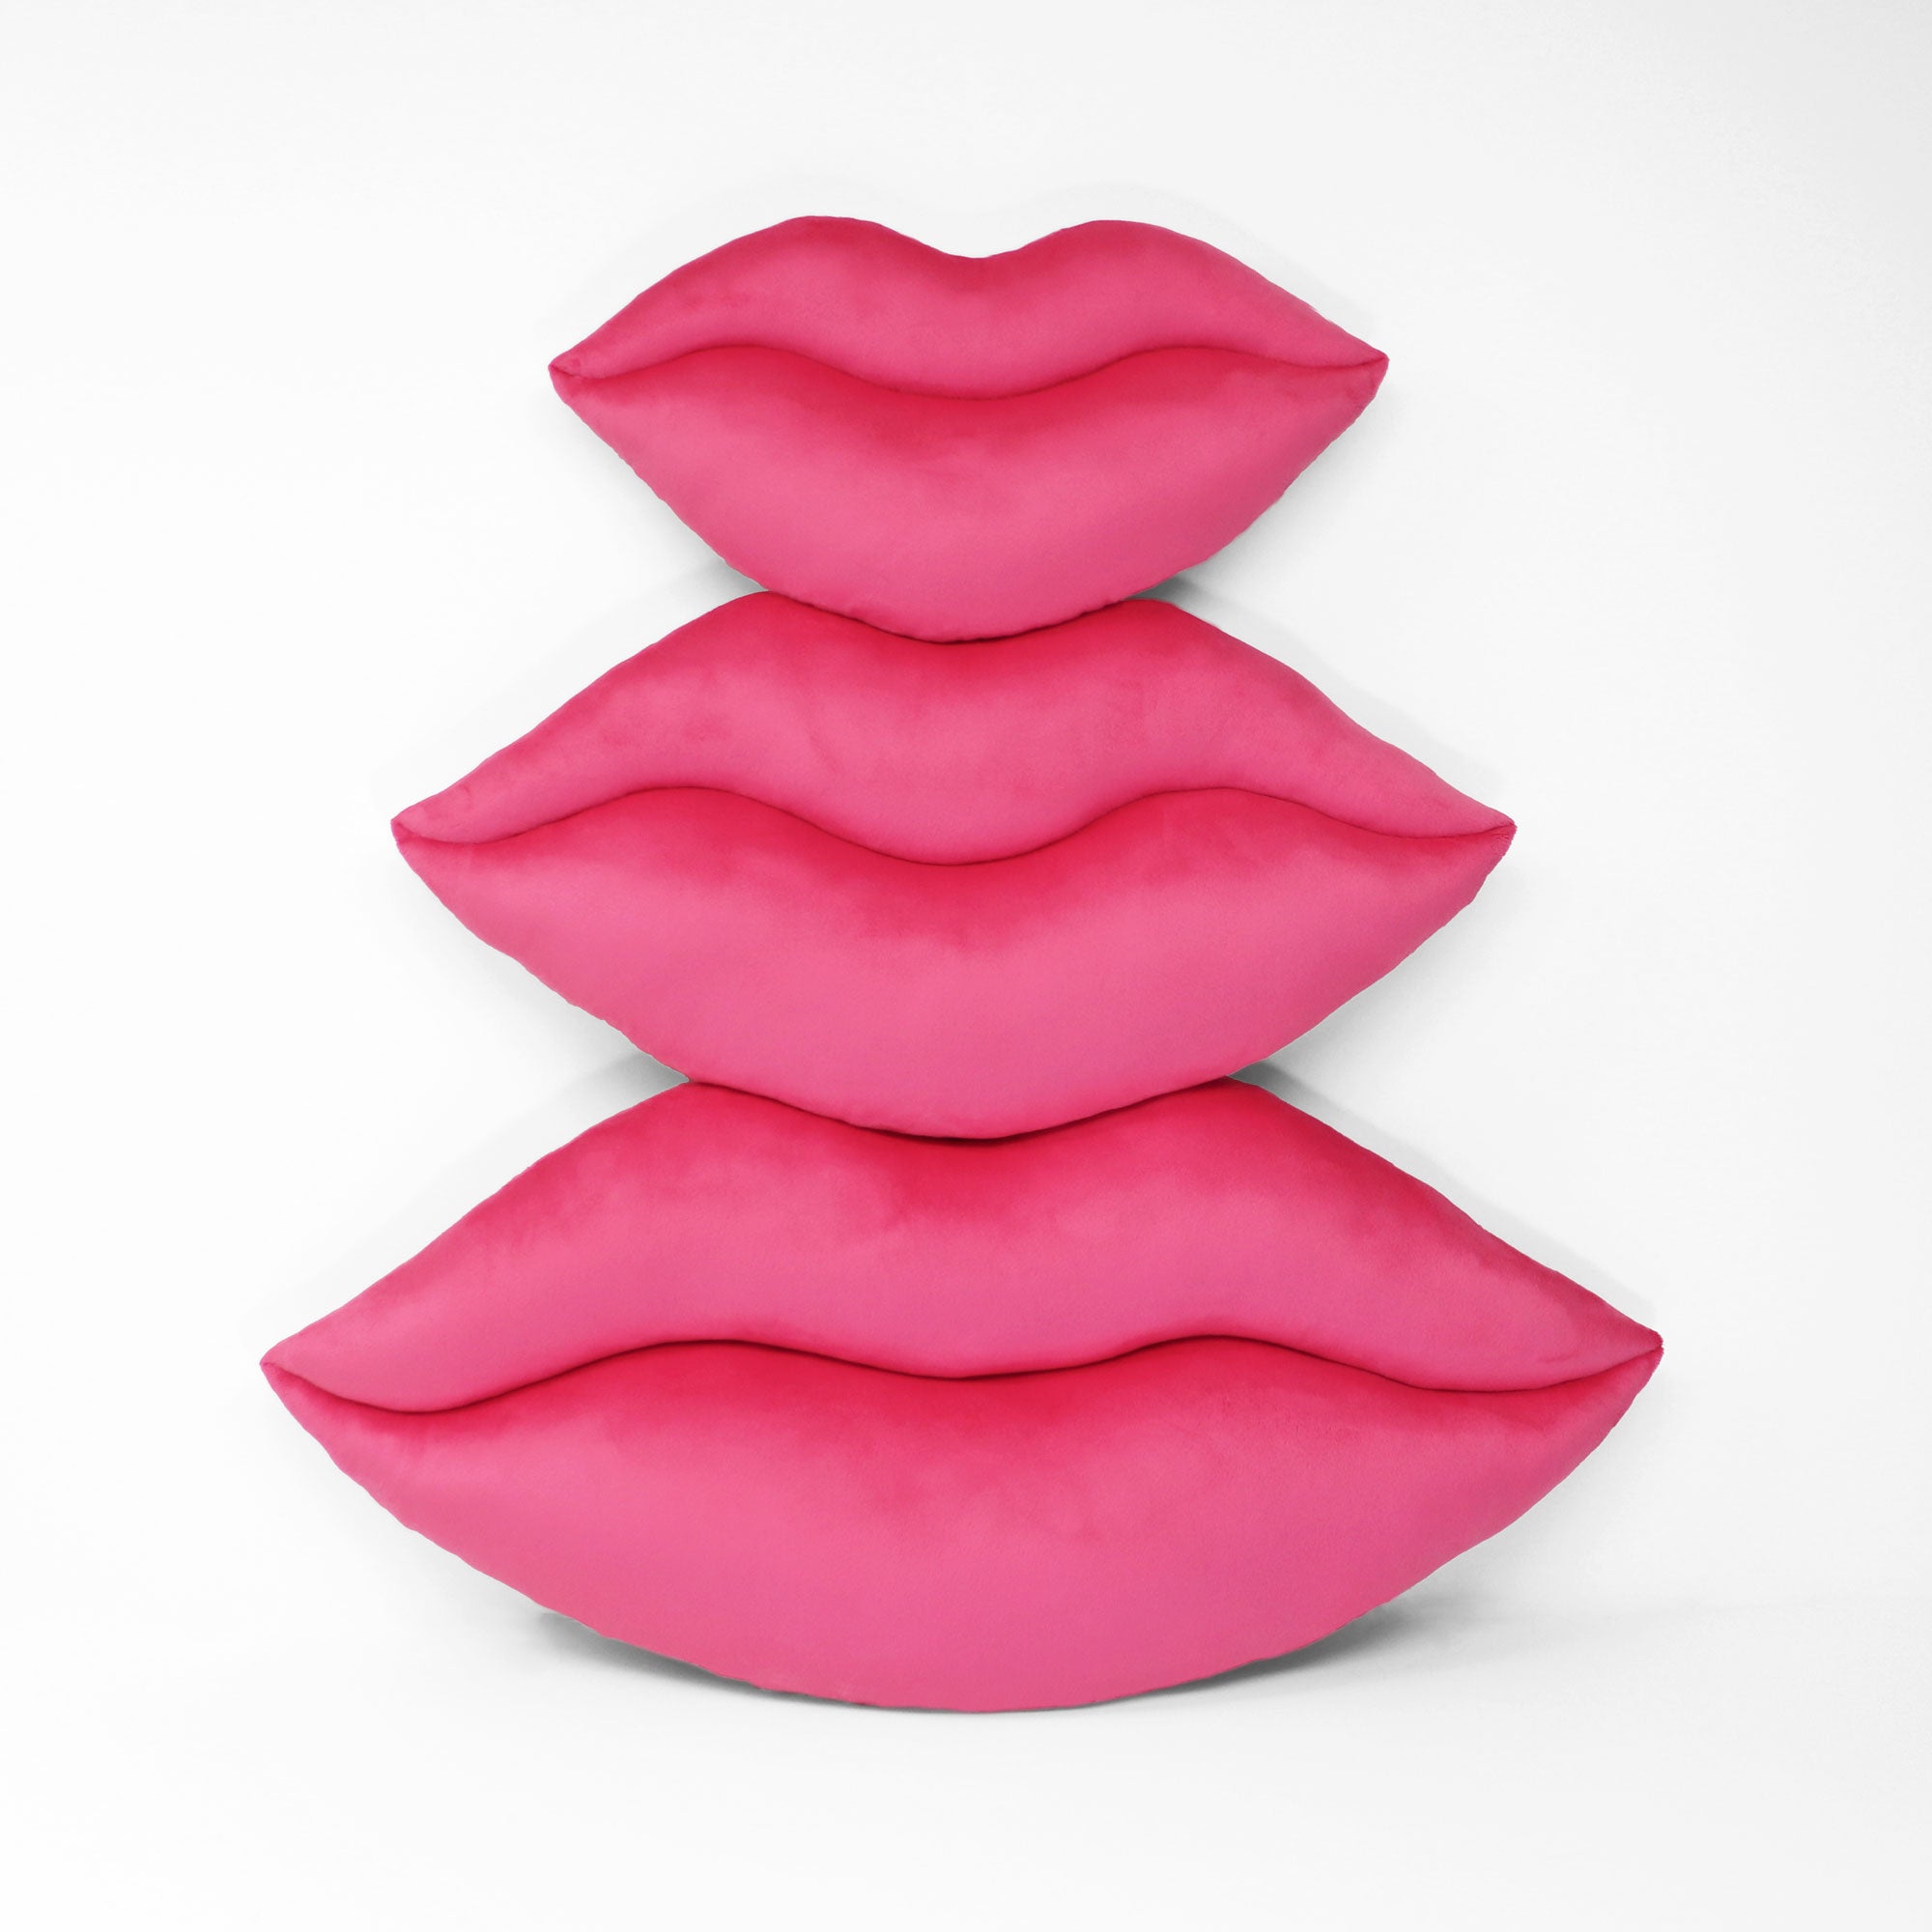 Three sizes of Hot Pink lips shaped decorative pillows.